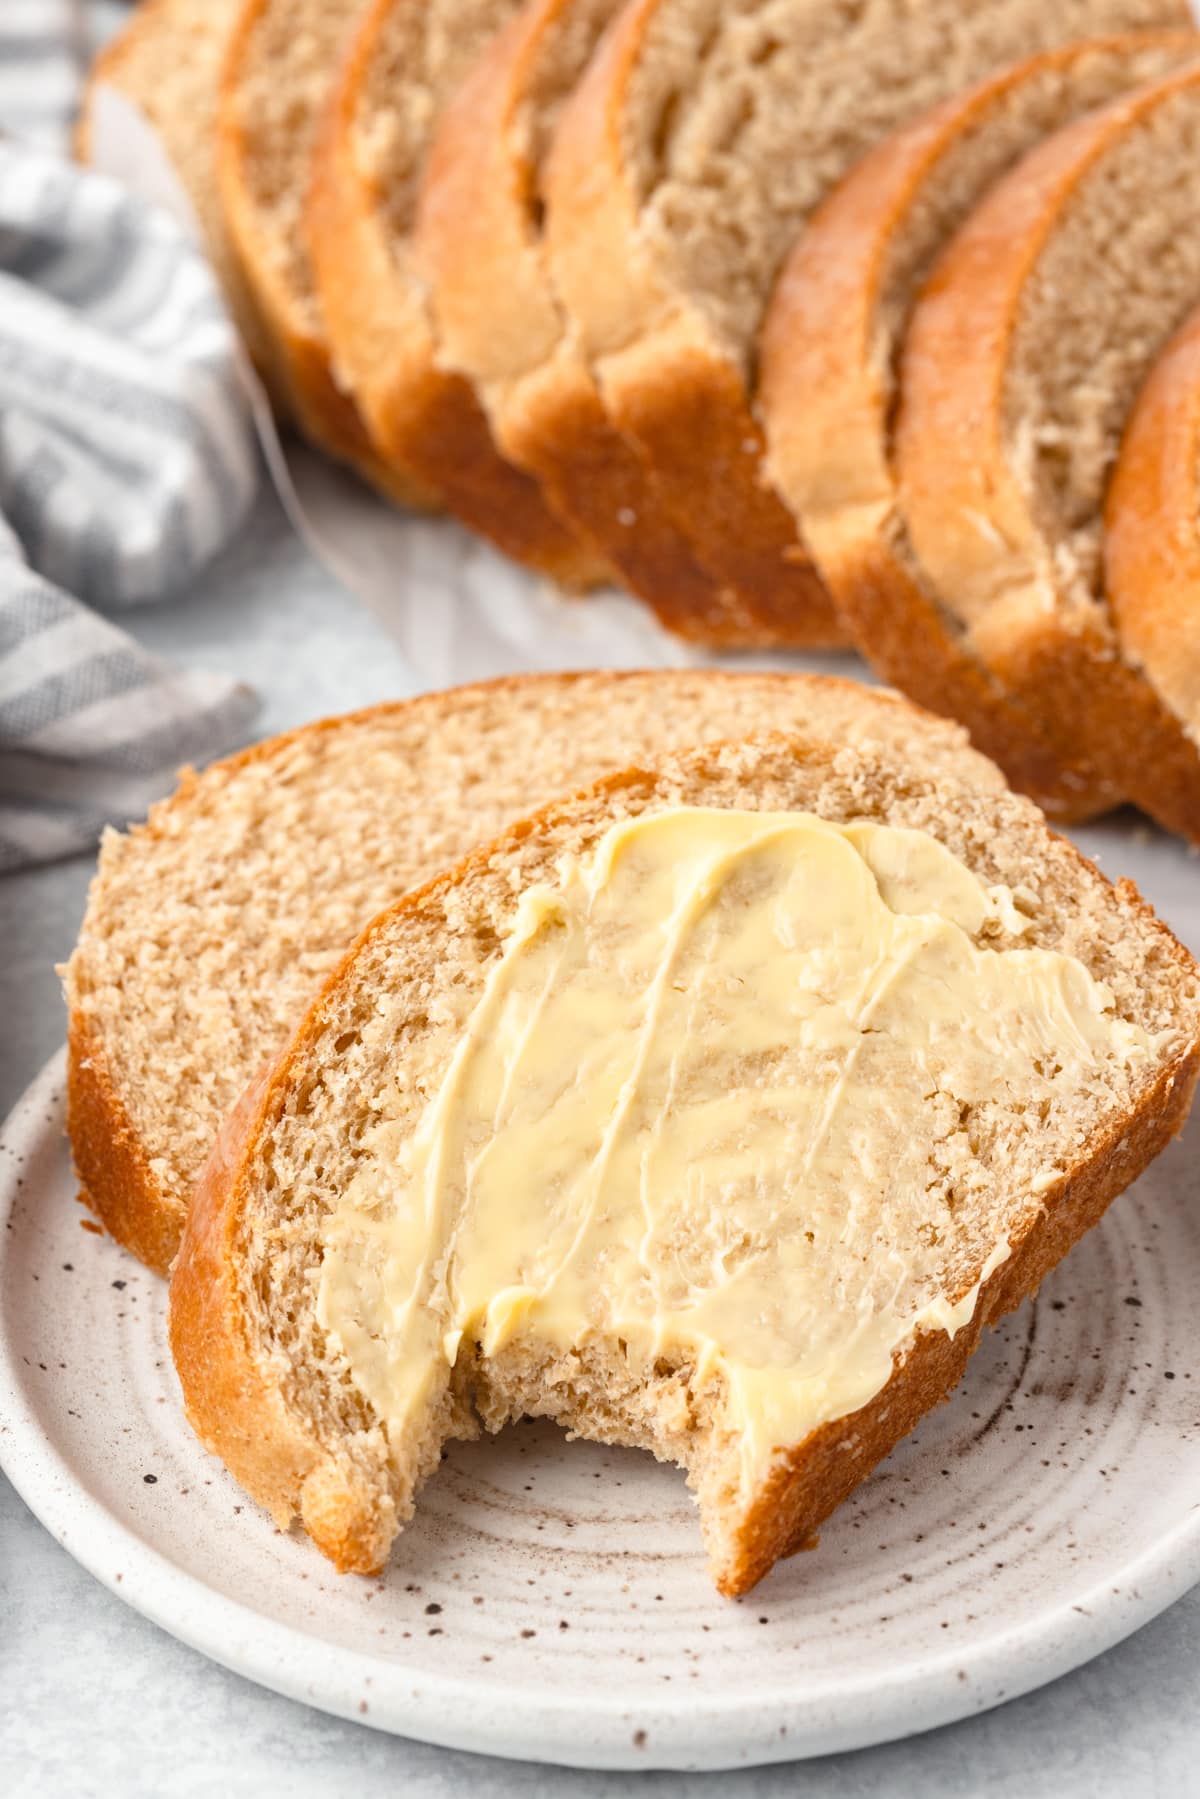 Two slices of bread on a small speckled plate, slathered in butter. One slice has a bite taken out of it.